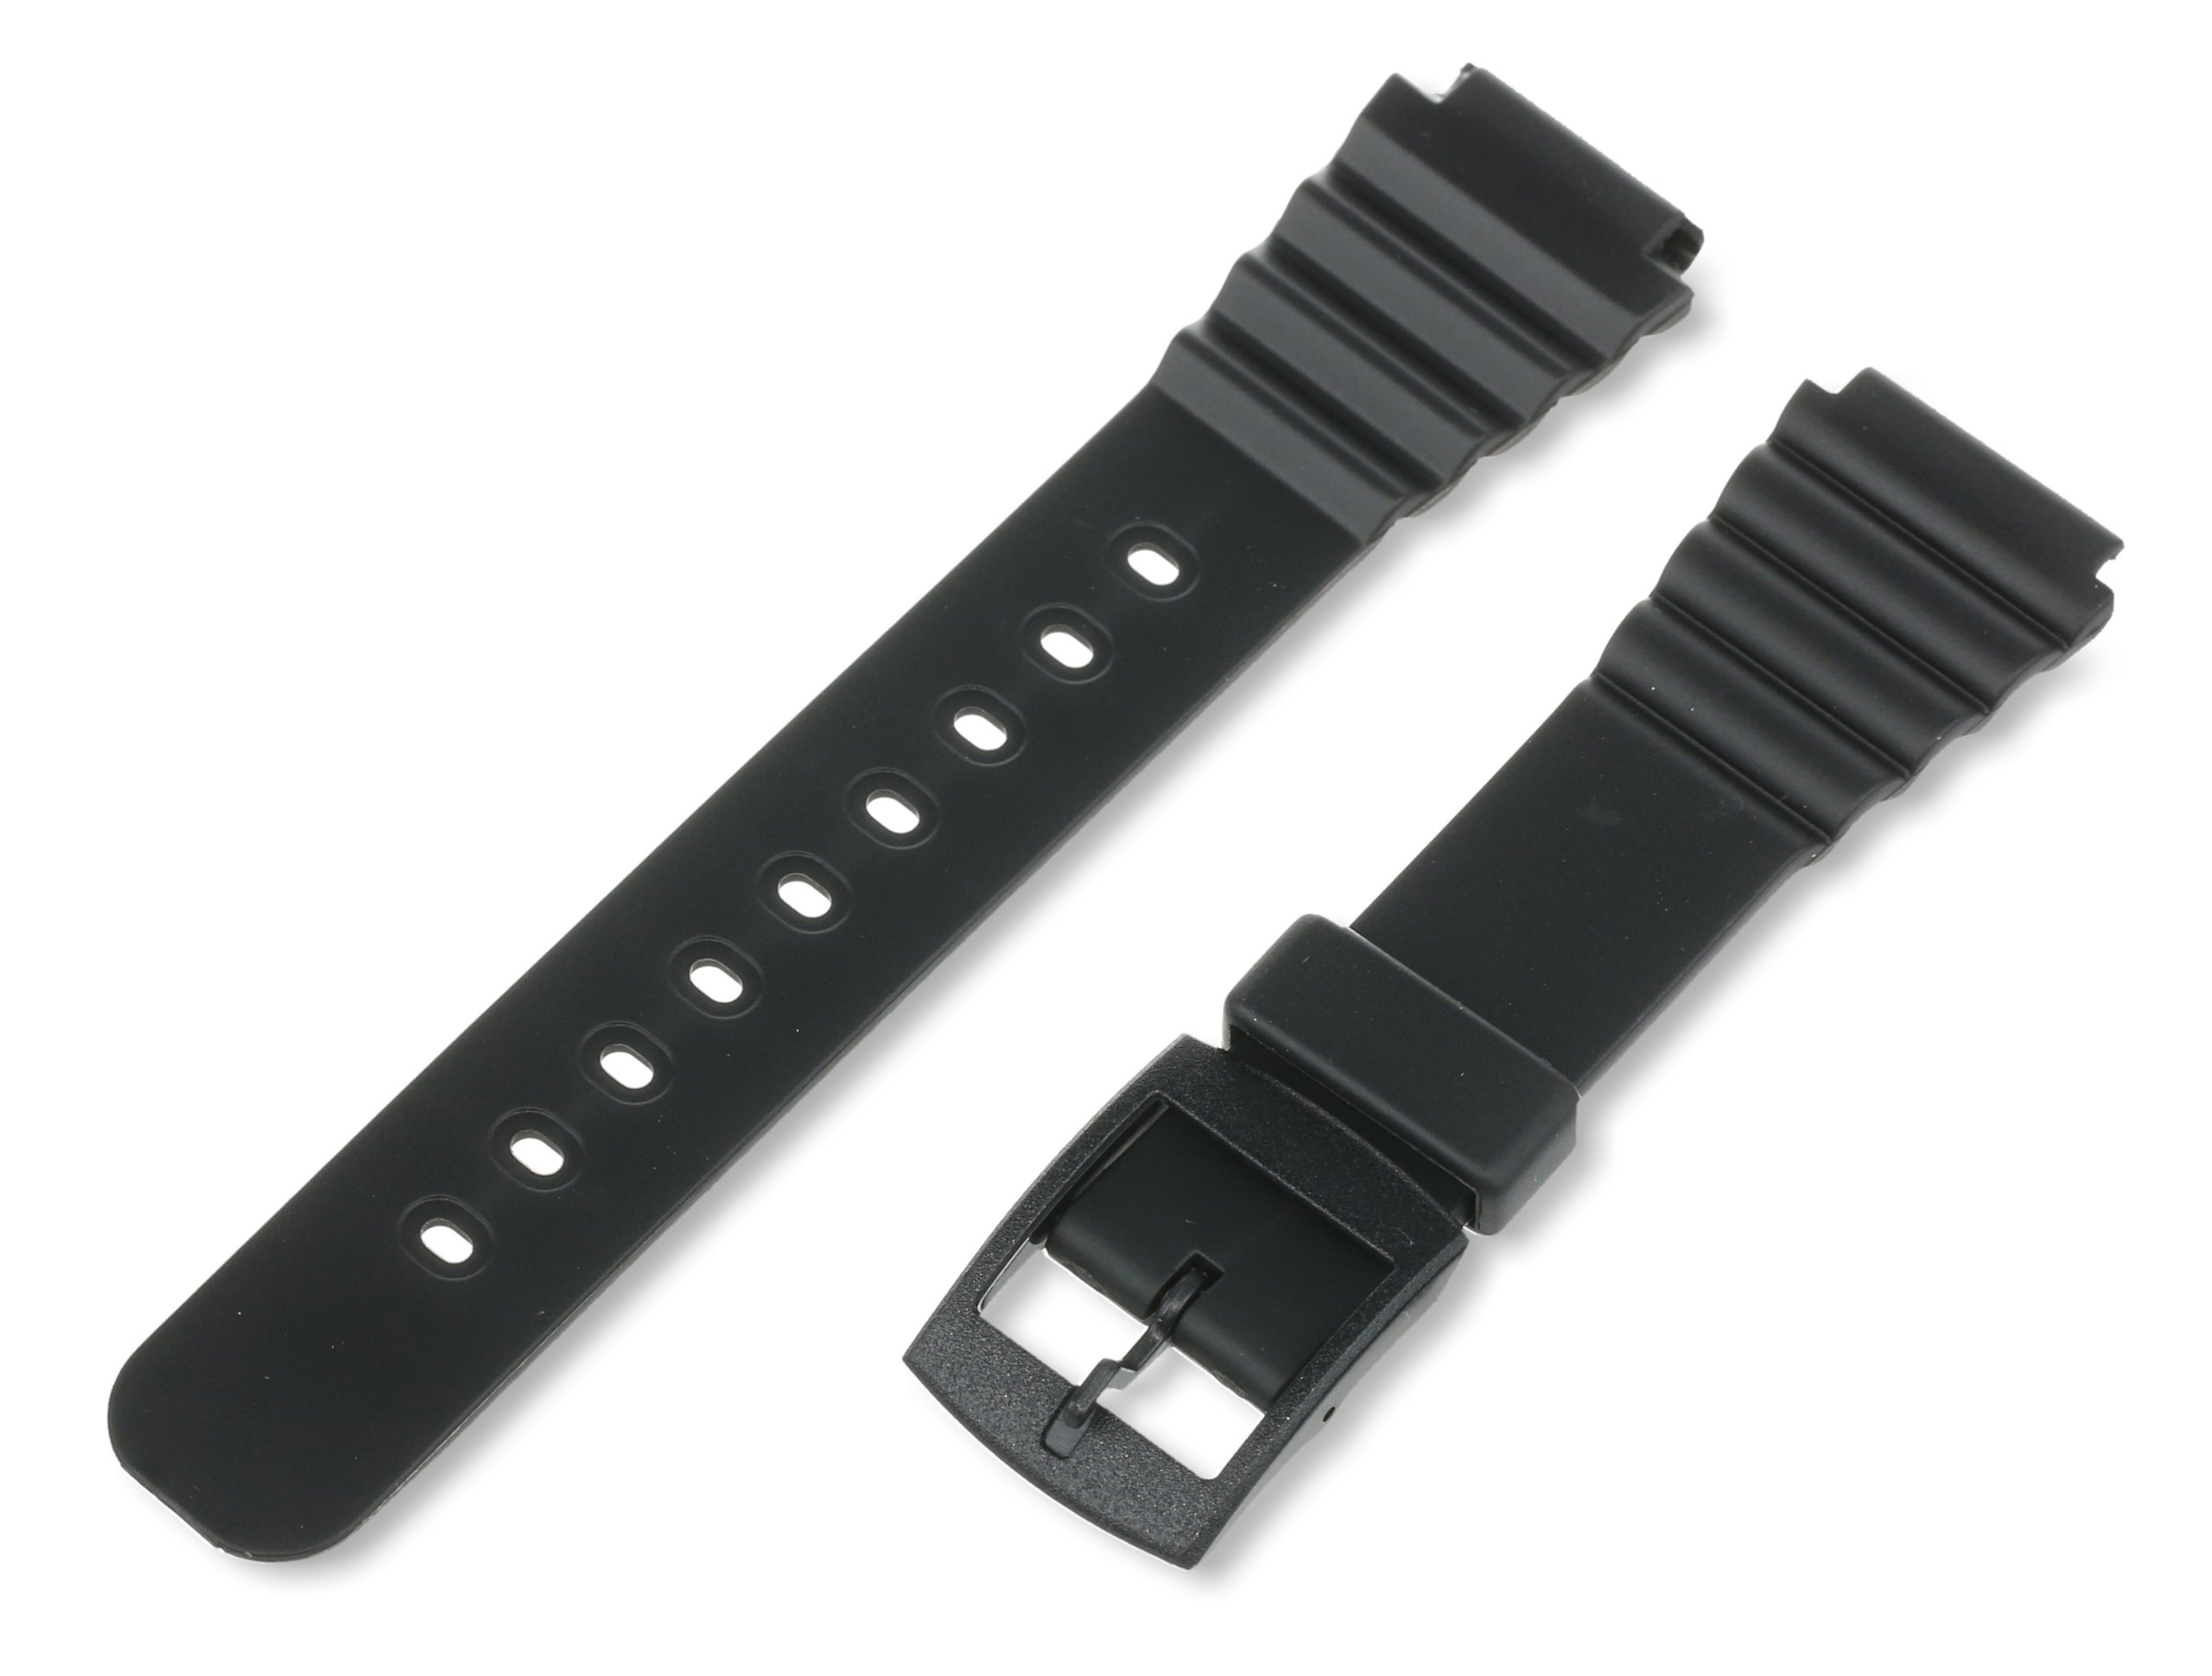 Voguestrap TX1840 Allstrap 18mm Black Regular-Length Fits Casio and Other Sport Watchband